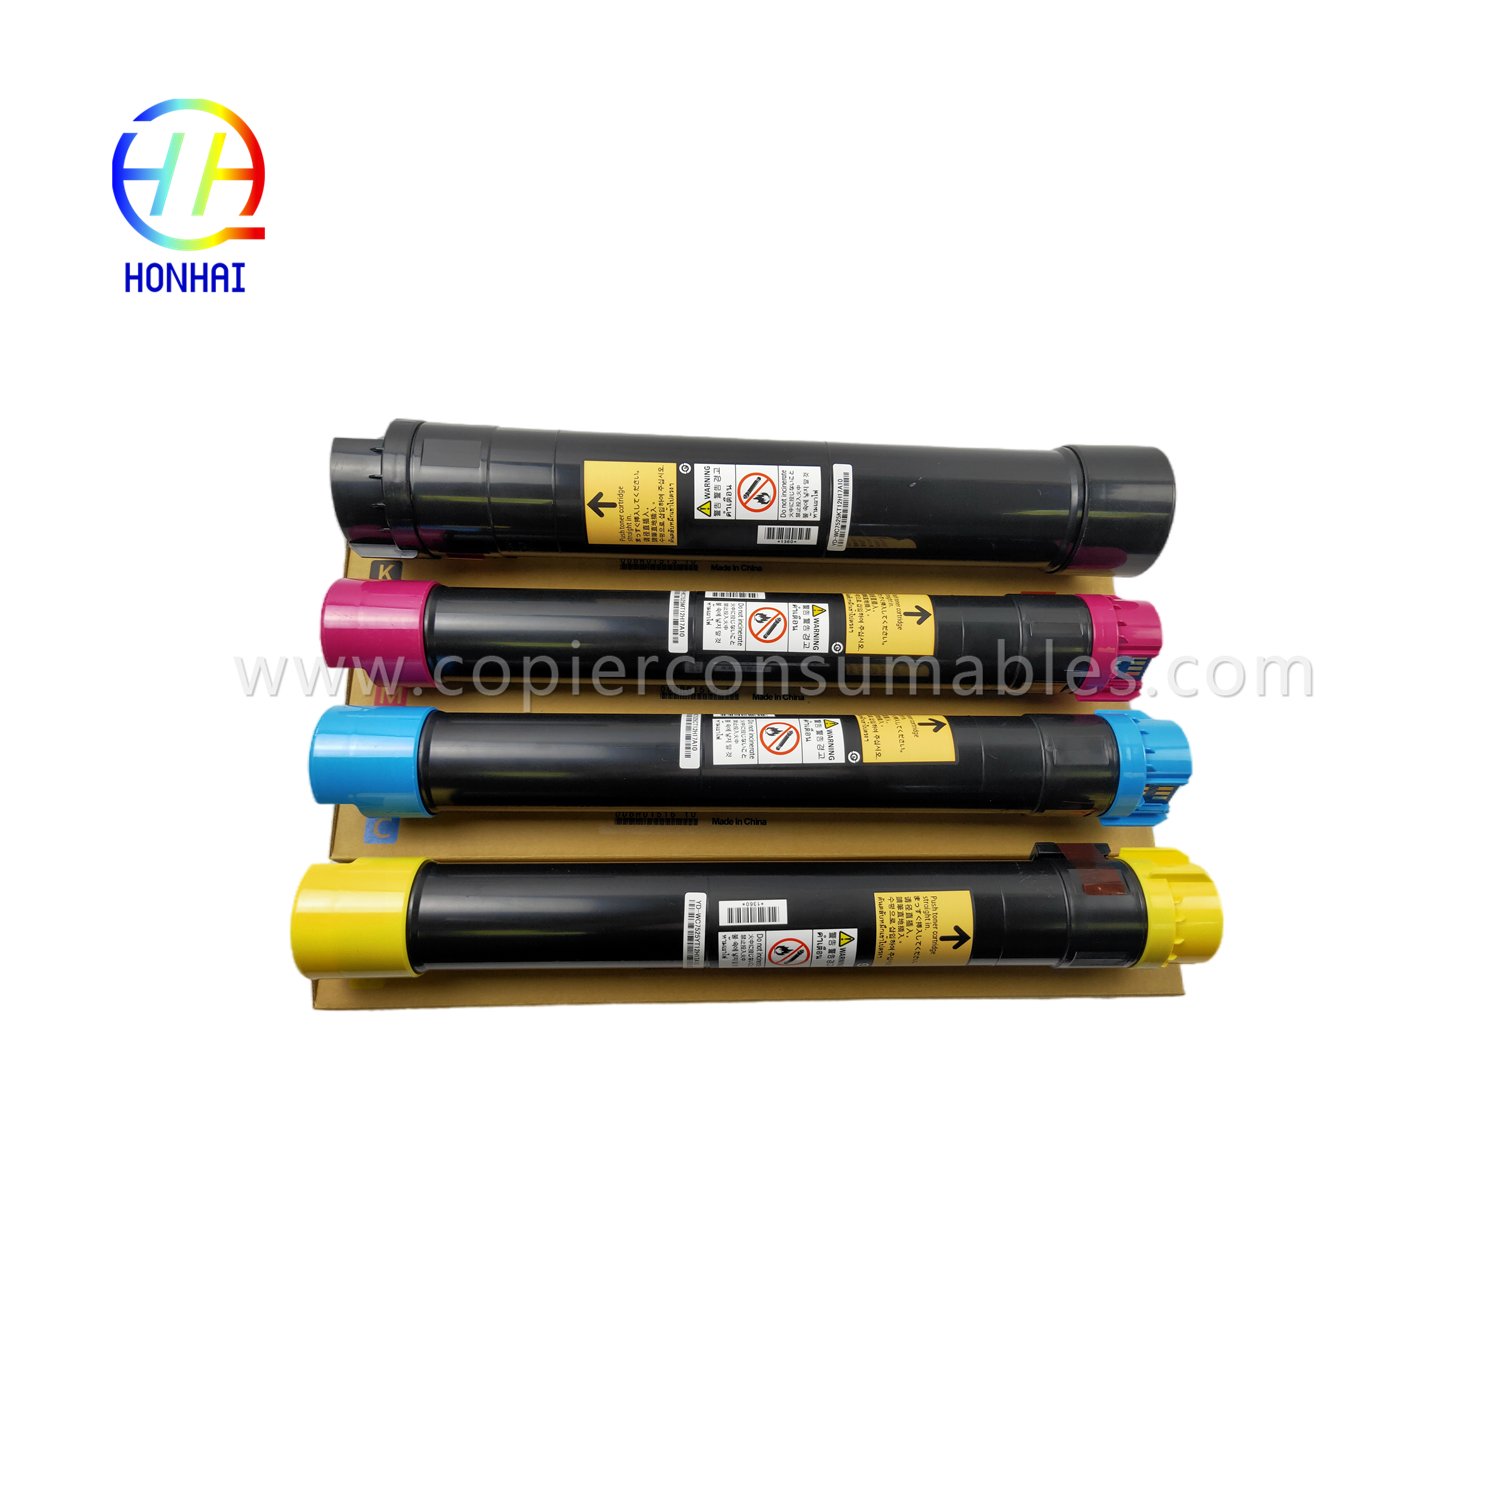 Toner Cartridge Imported Powder Set (BCMY) for Xerox Workcentre 7830 7835 7845 7855 7970 7525 7530 7535 7545 7556 006R01513 006R01514 006R01515 006R01516